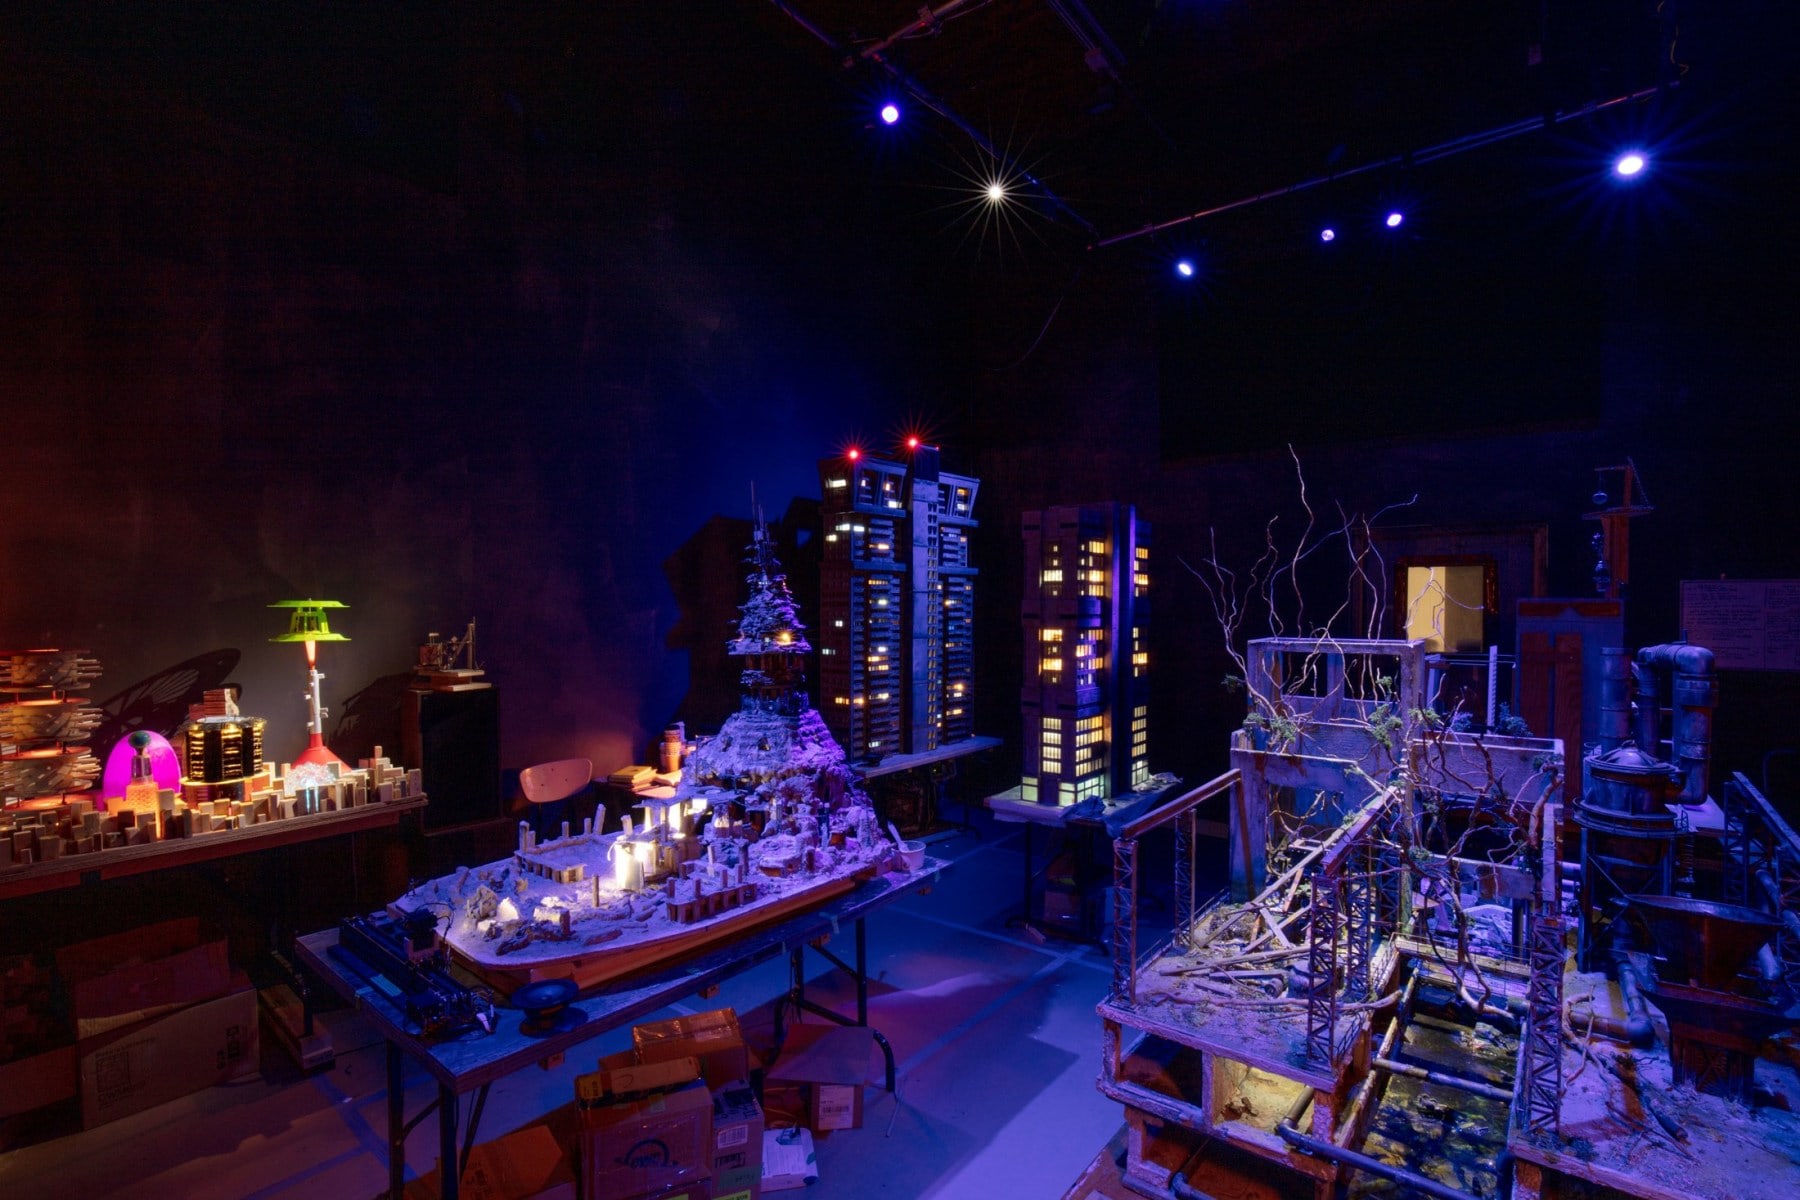 Gallery installation of a miniature city bathed in dark blue light